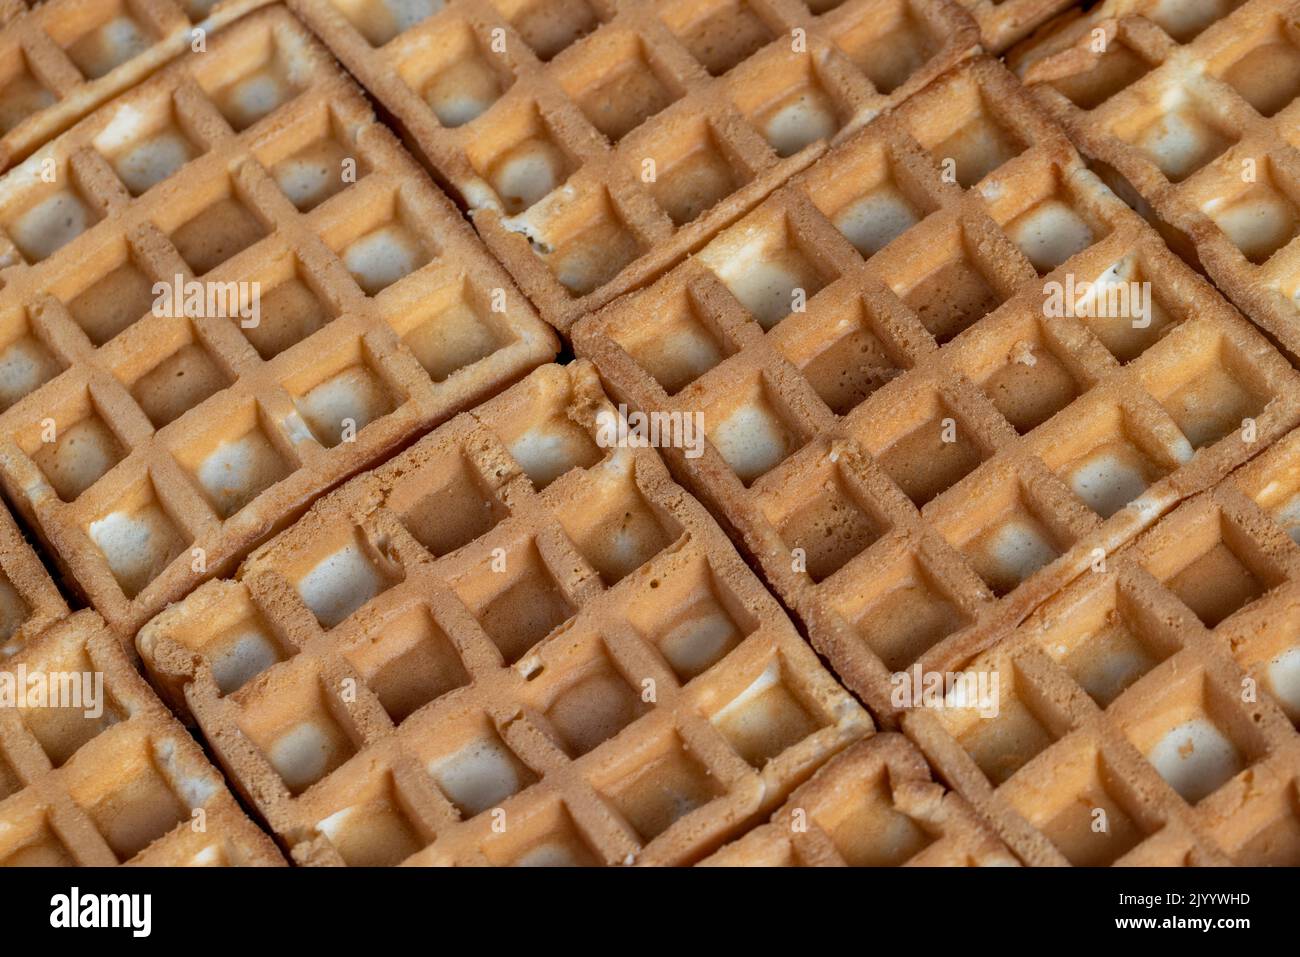 soft sweet waffles on the table, waffle ingredient for making desserts Stock Photo